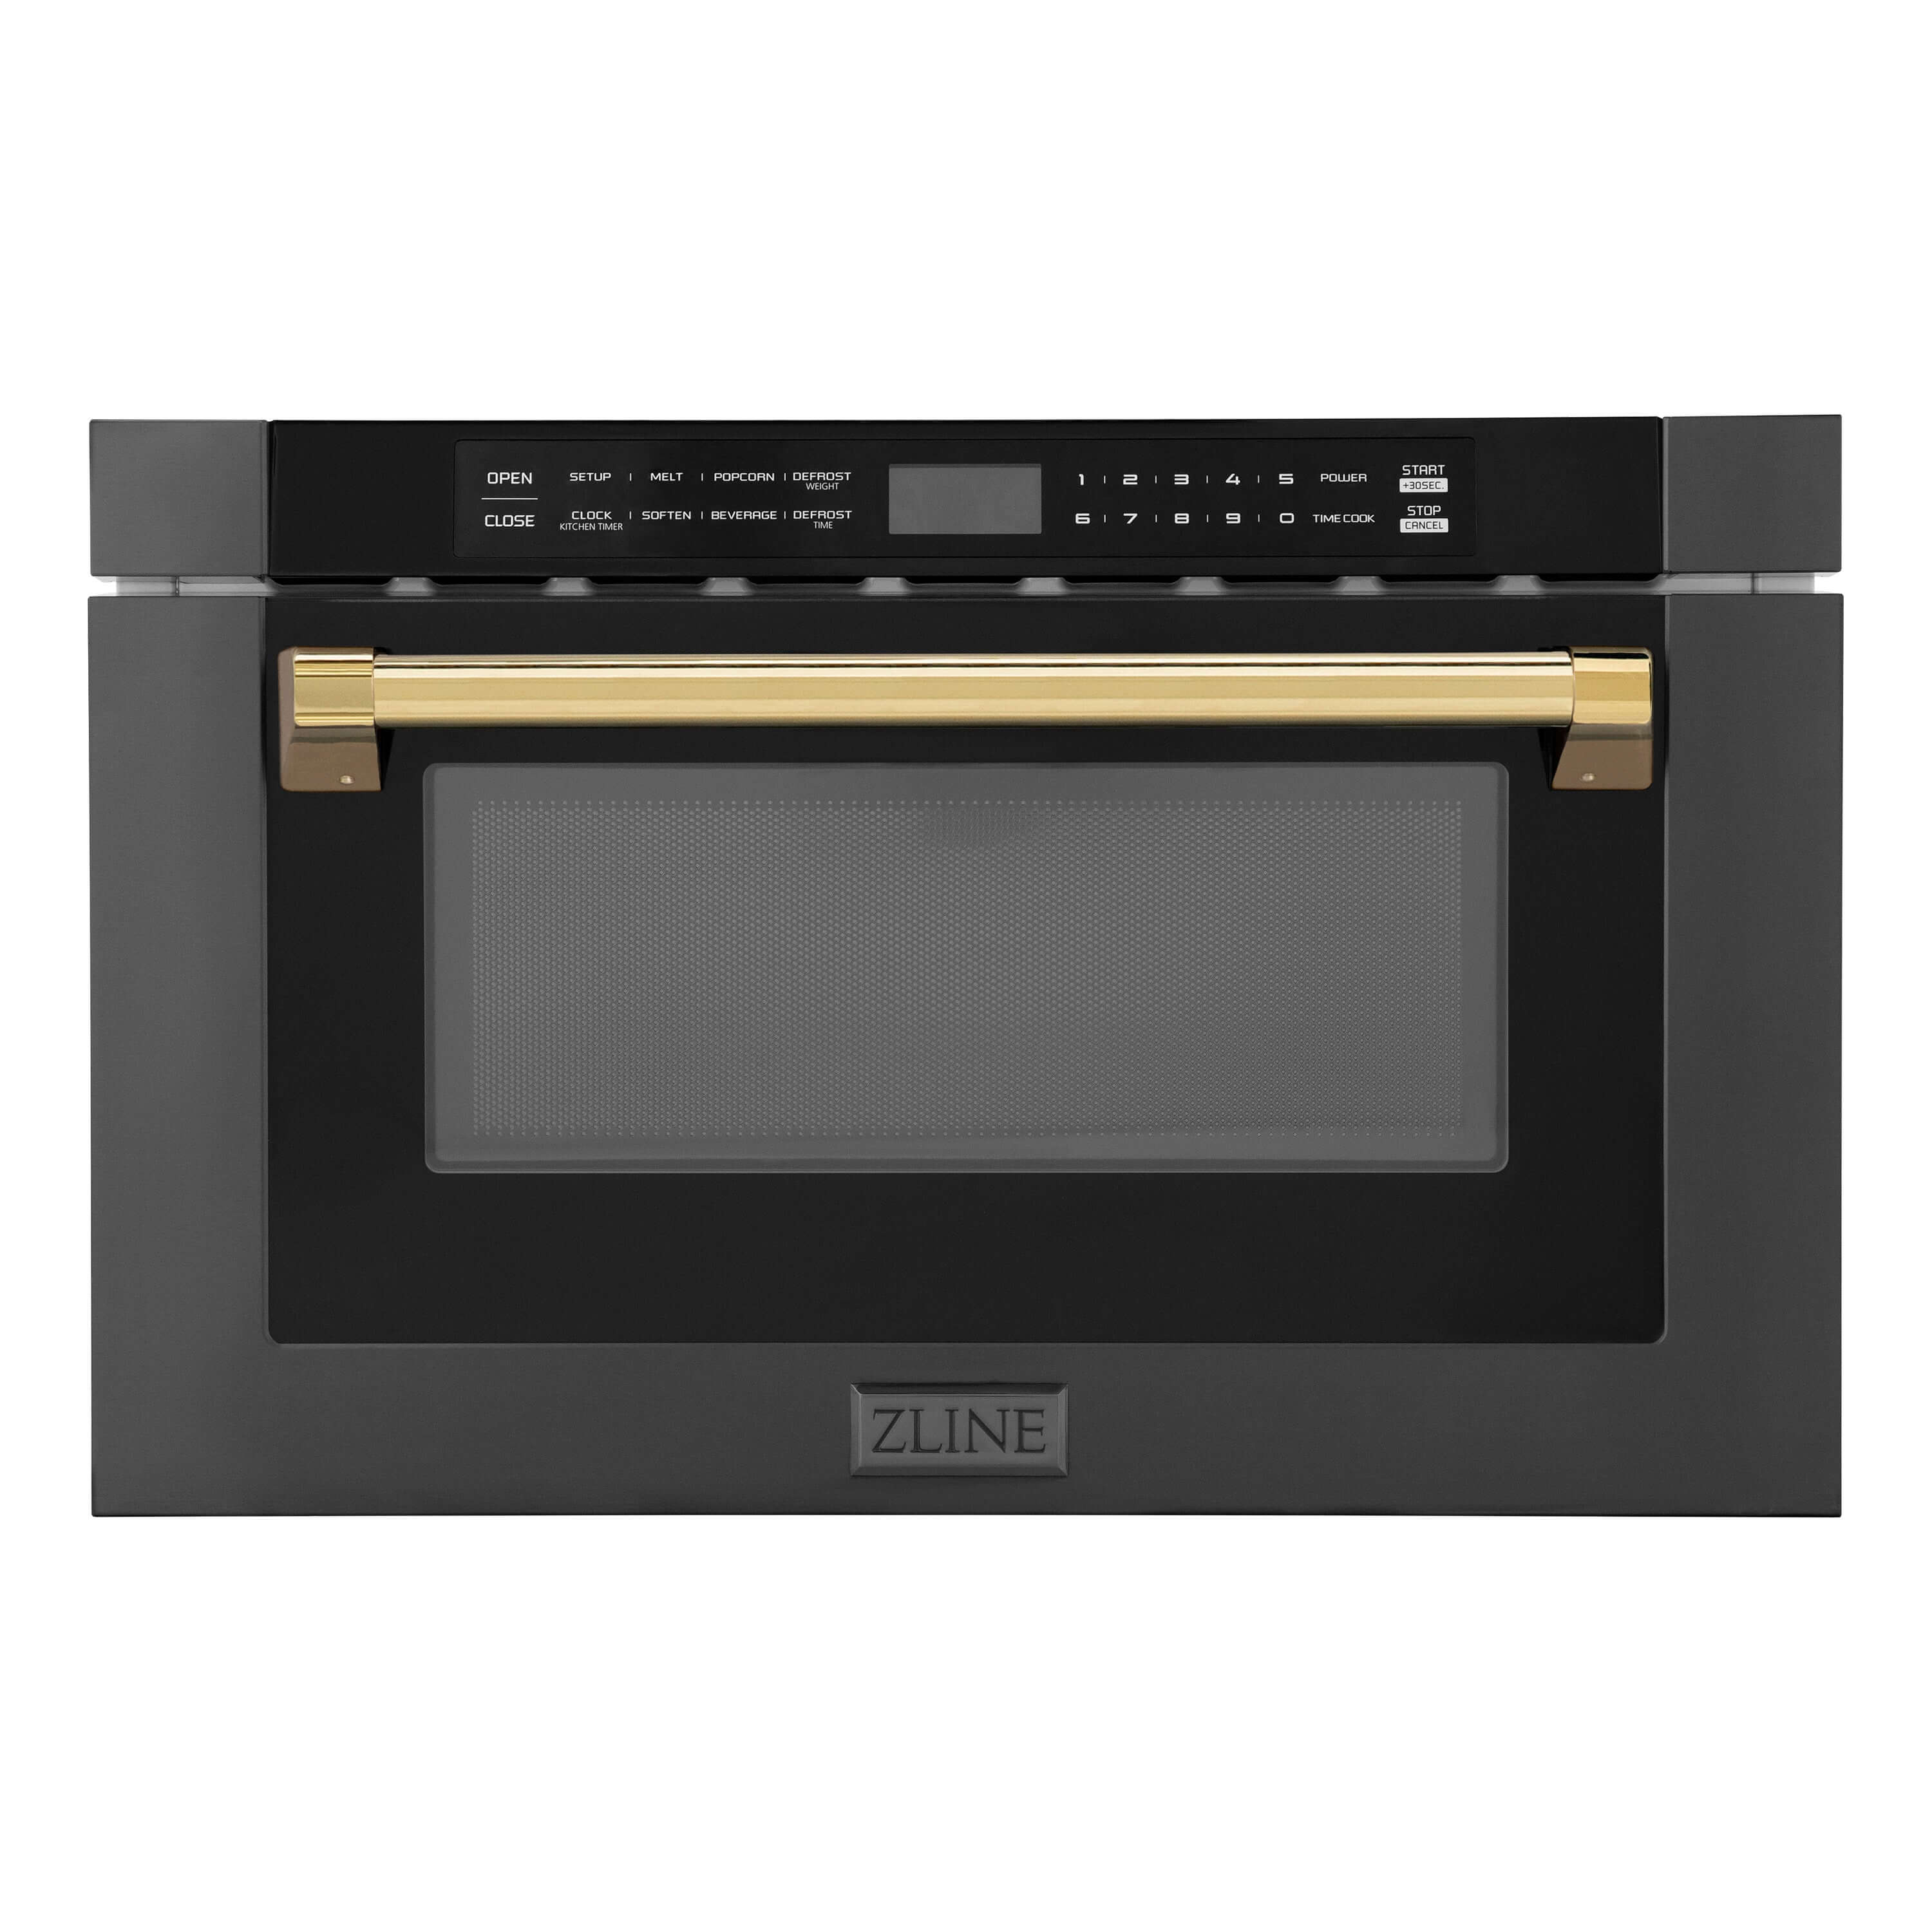 ZLINE 24 in. Stainless Steel Built-in Convection Microwave Oven with Speed and Sensor Cooking (MWO-24)